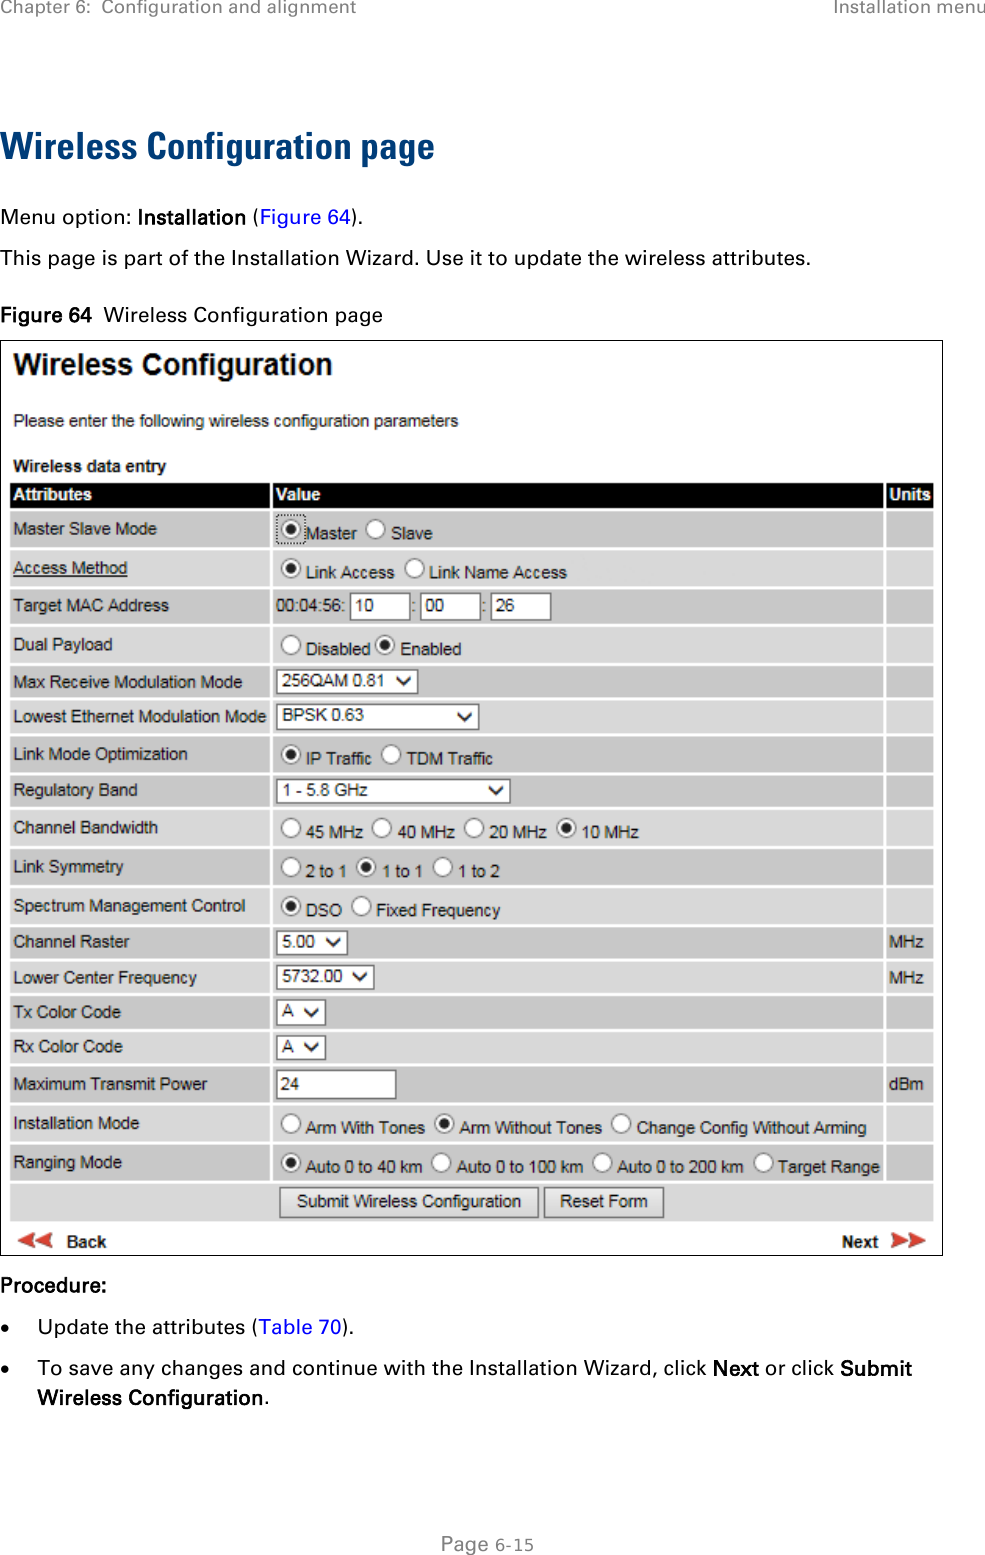 Chapter 6:  Configuration and alignment Installation menu  Wireless Configuration page Menu option: Installation (Figure 64). This page is part of the Installation Wizard. Use it to update the wireless attributes. Figure 64  Wireless Configuration page  Procedure: • Update the attributes (Table 70). • To save any changes and continue with the Installation Wizard, click Next or click Submit Wireless Configuration.  Page 6-15 